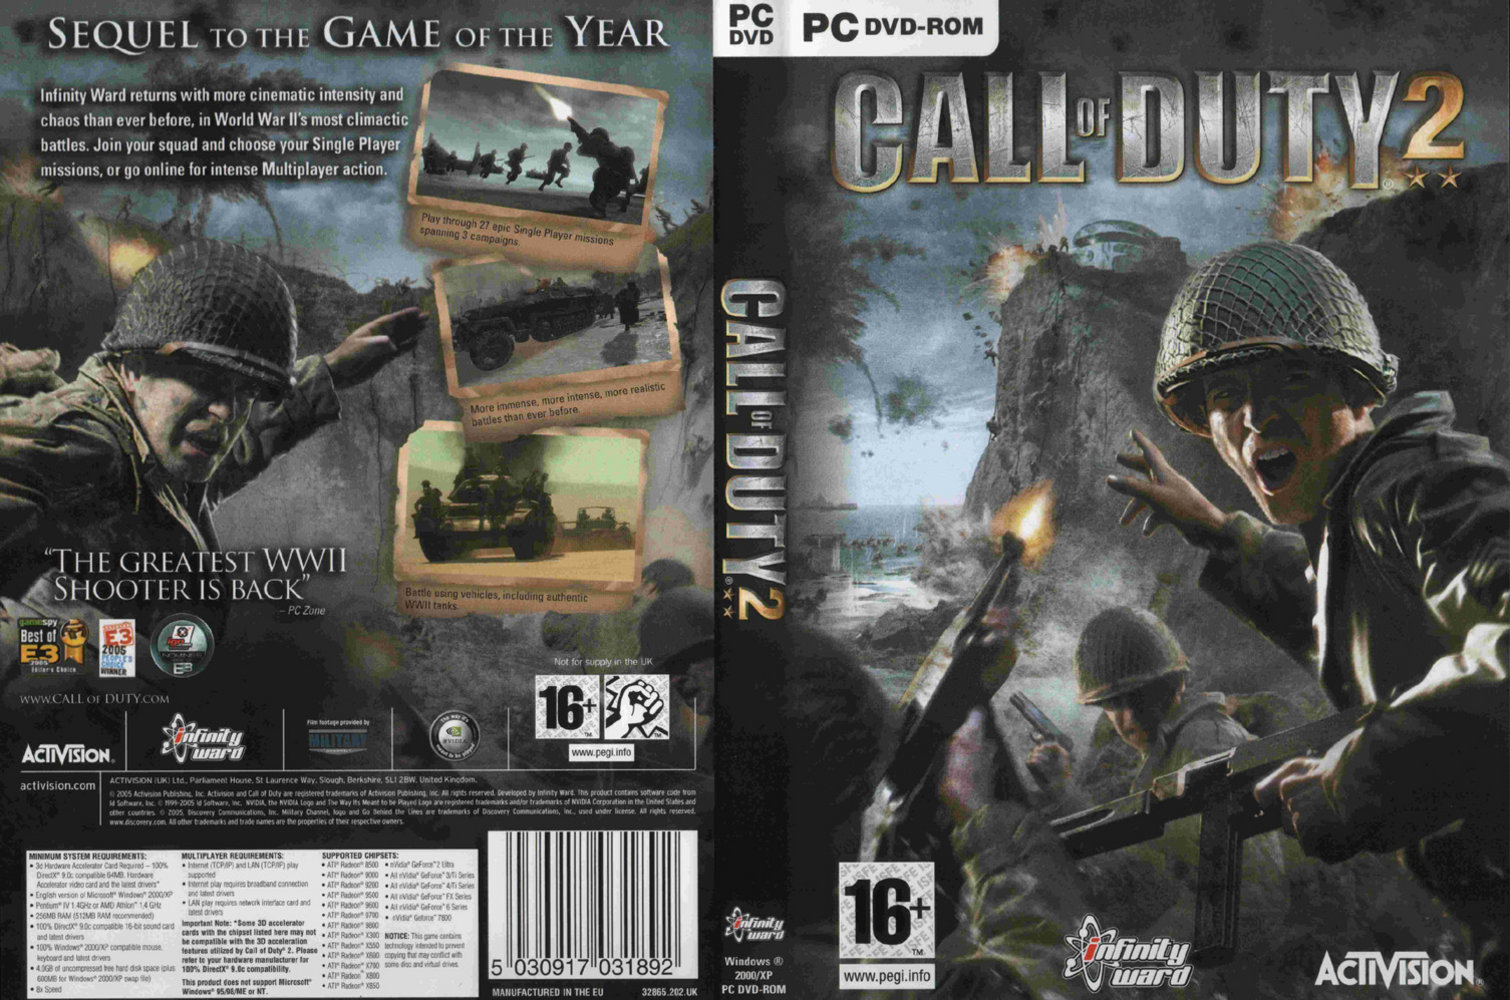 Call of Duty 2 Free Download: Call of Duty 2 Free Download